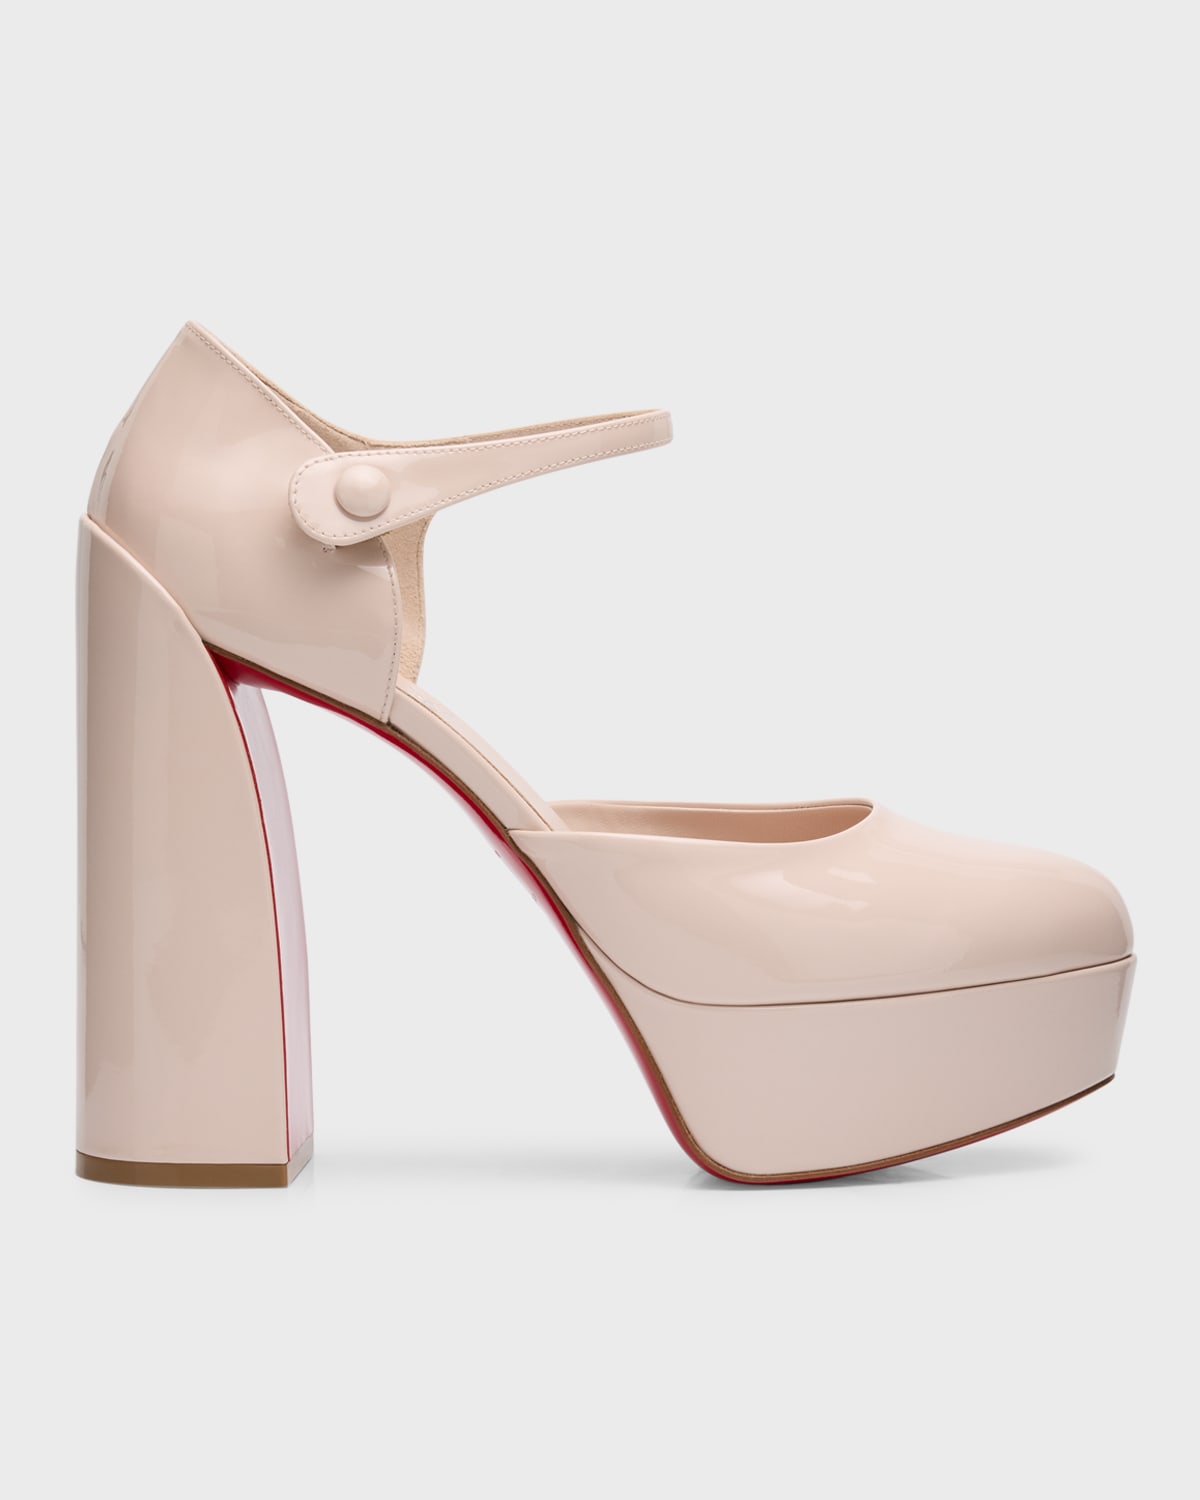 Christian Louboutin Movida Patent Red Sole Platform Pumps In Leche